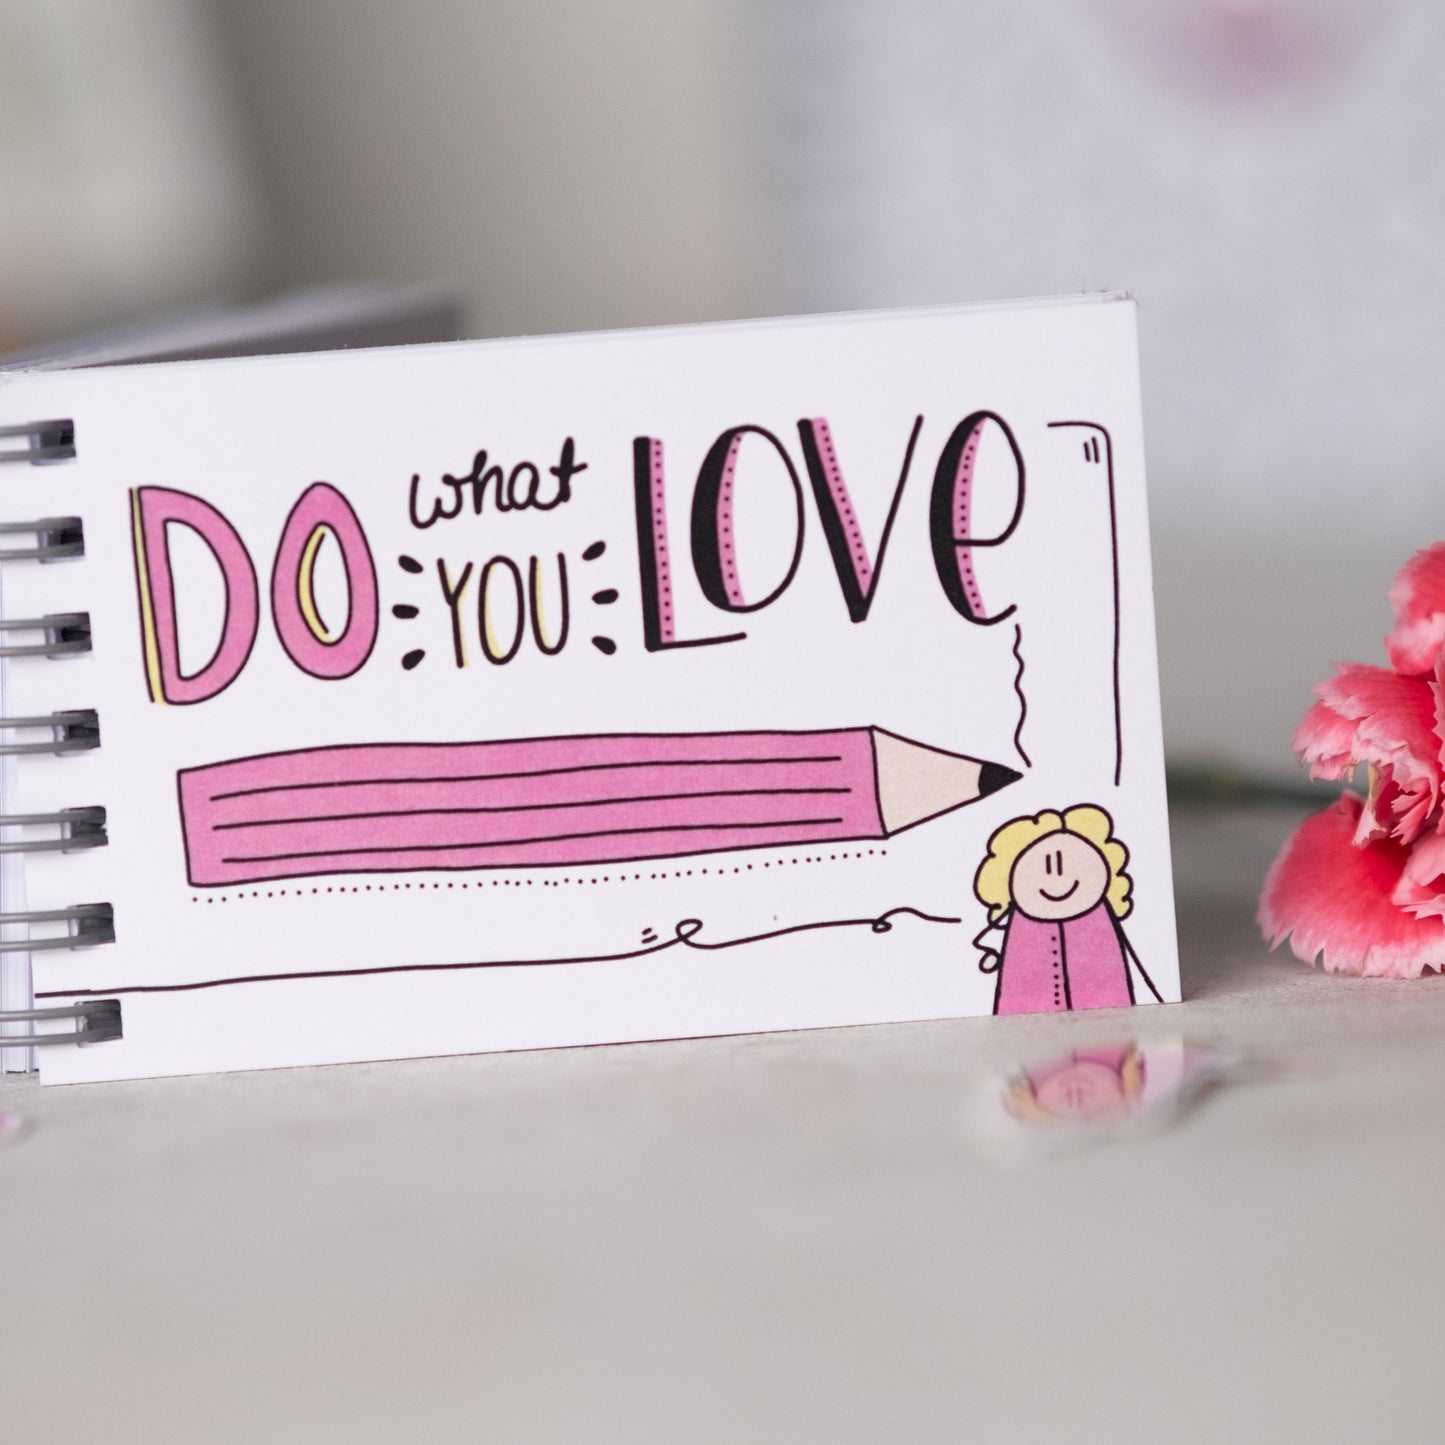 Sketchbook Mini "Do what you love" & „Follow your dreams“